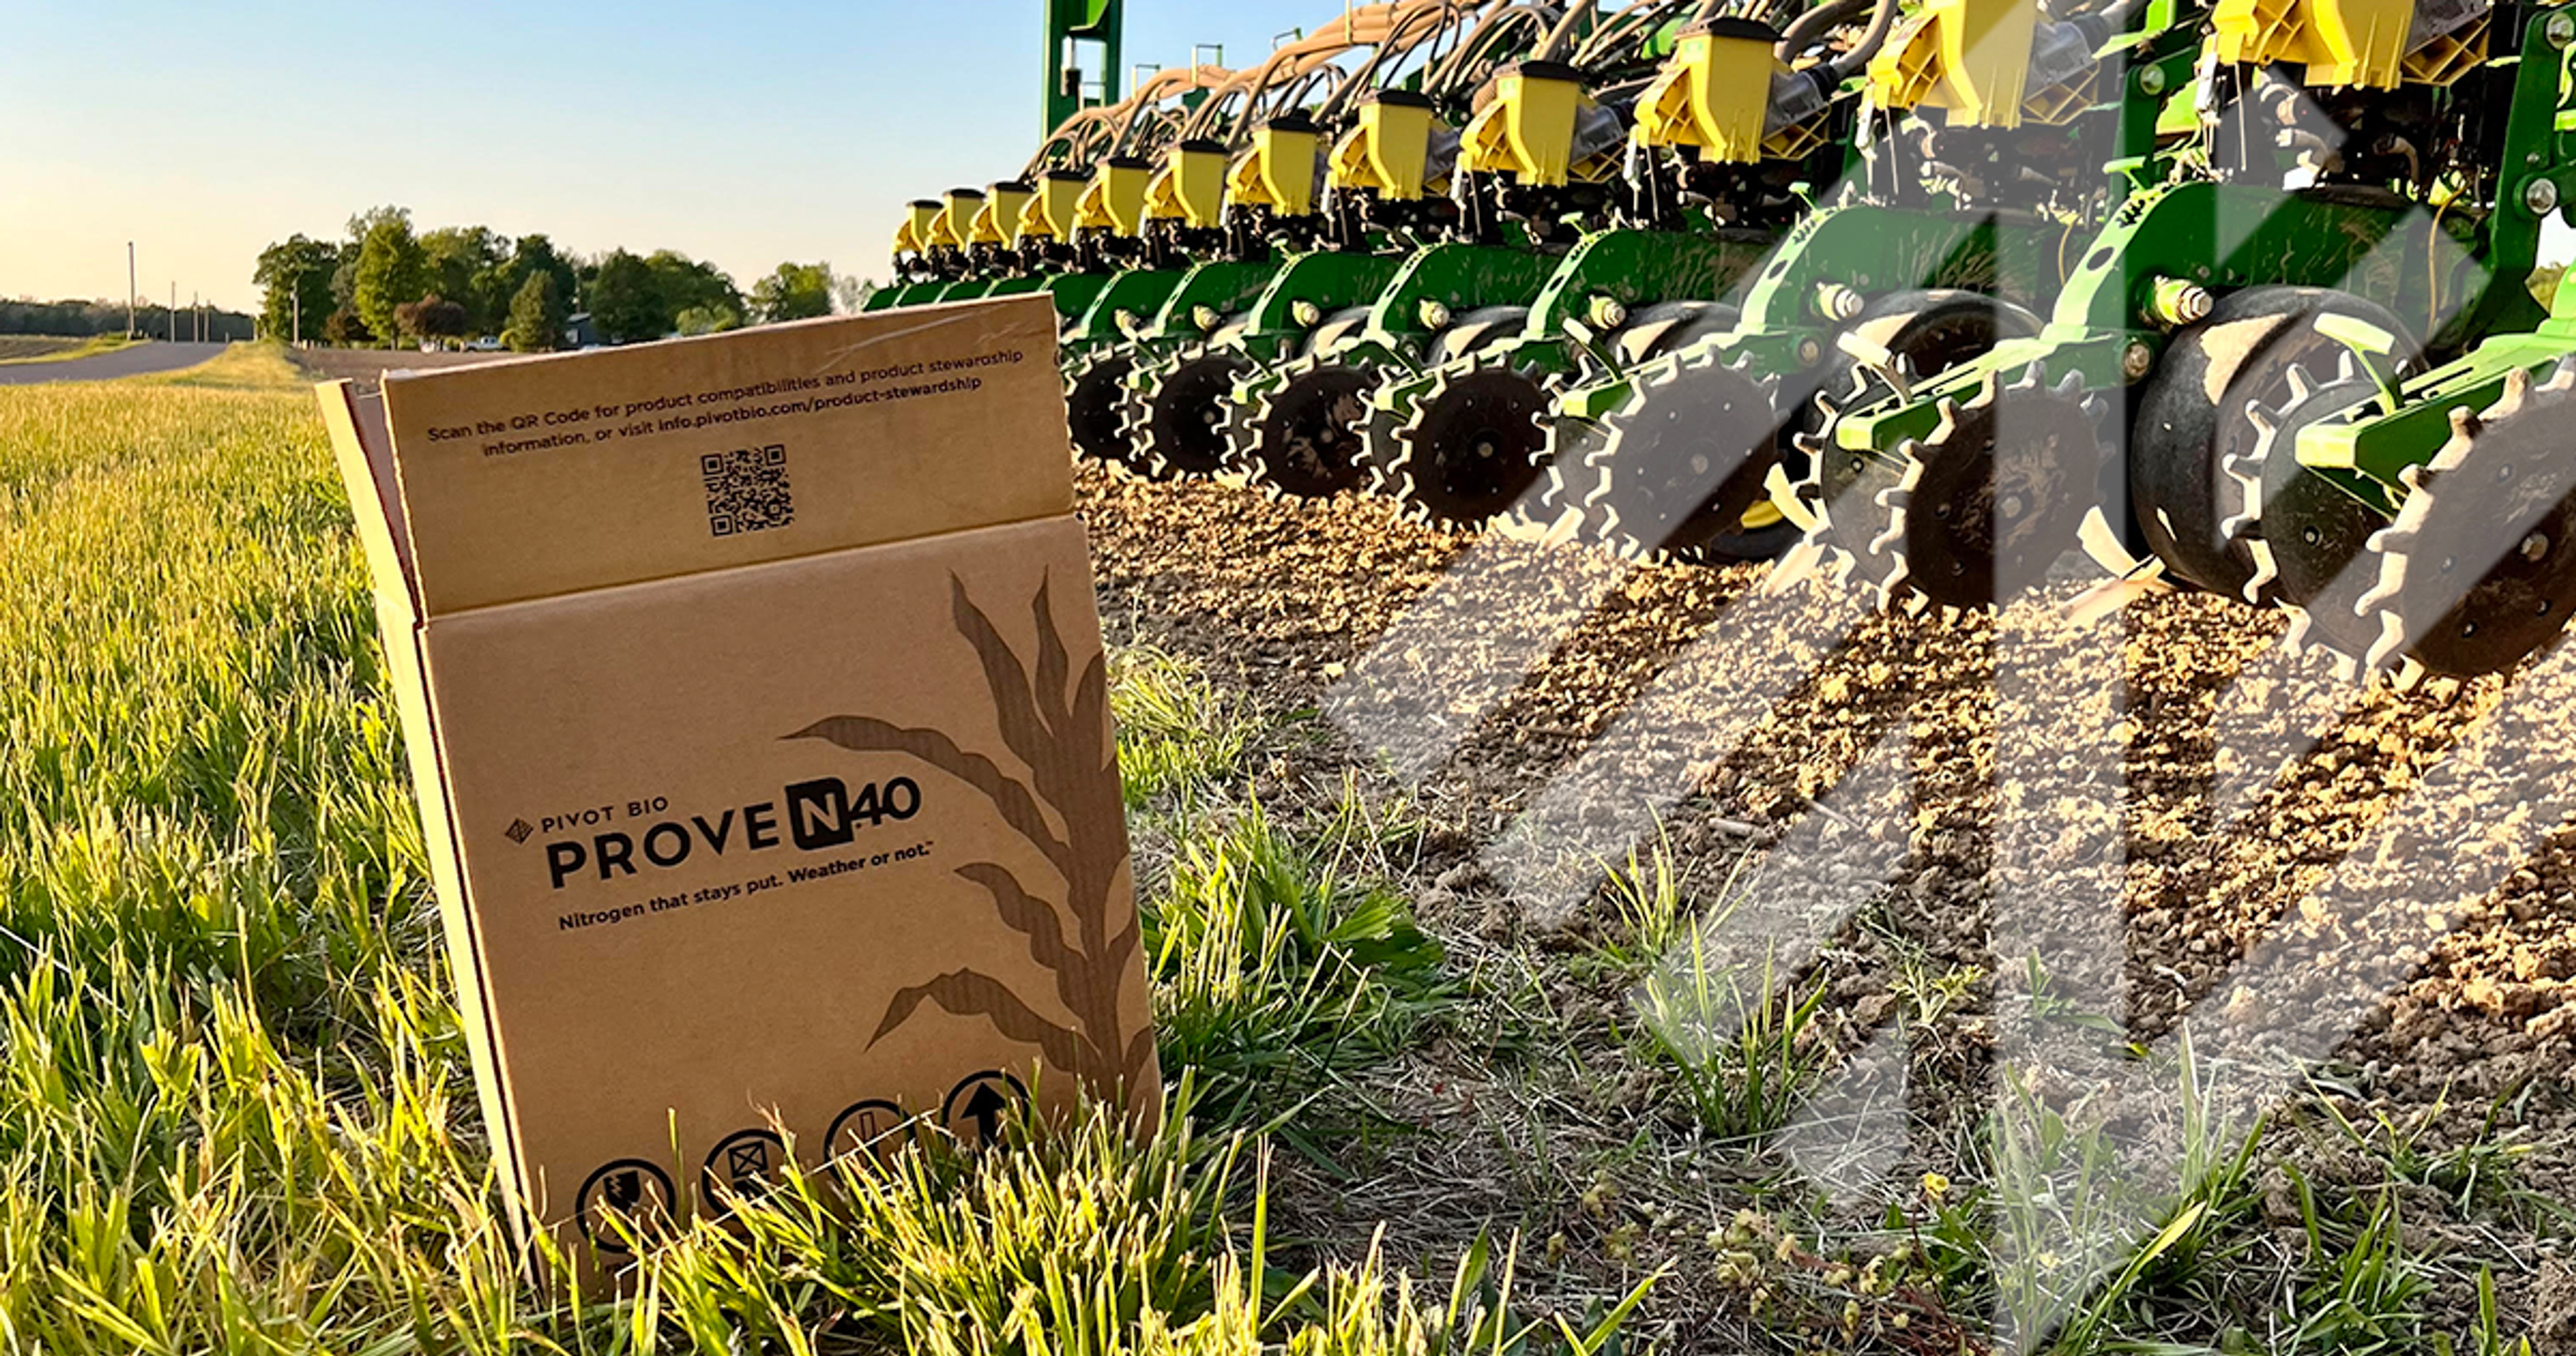 Tips For Setting Up Your Pivot Bio On-Farm Trial